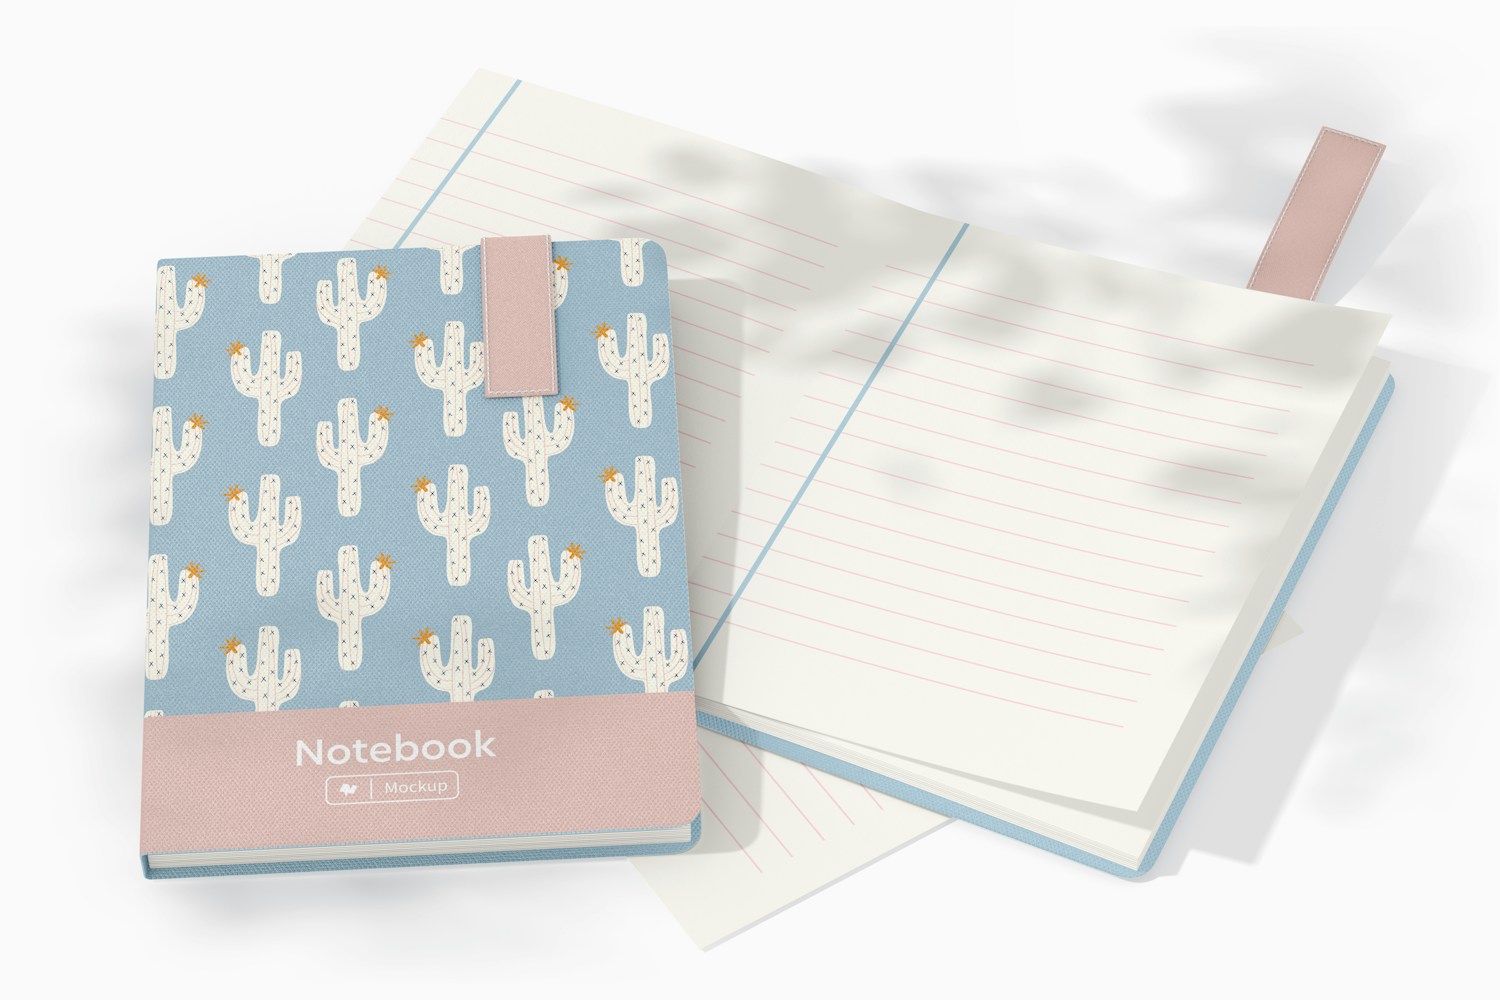 Notebooks With Top Flap Mockup, Opened and Closed